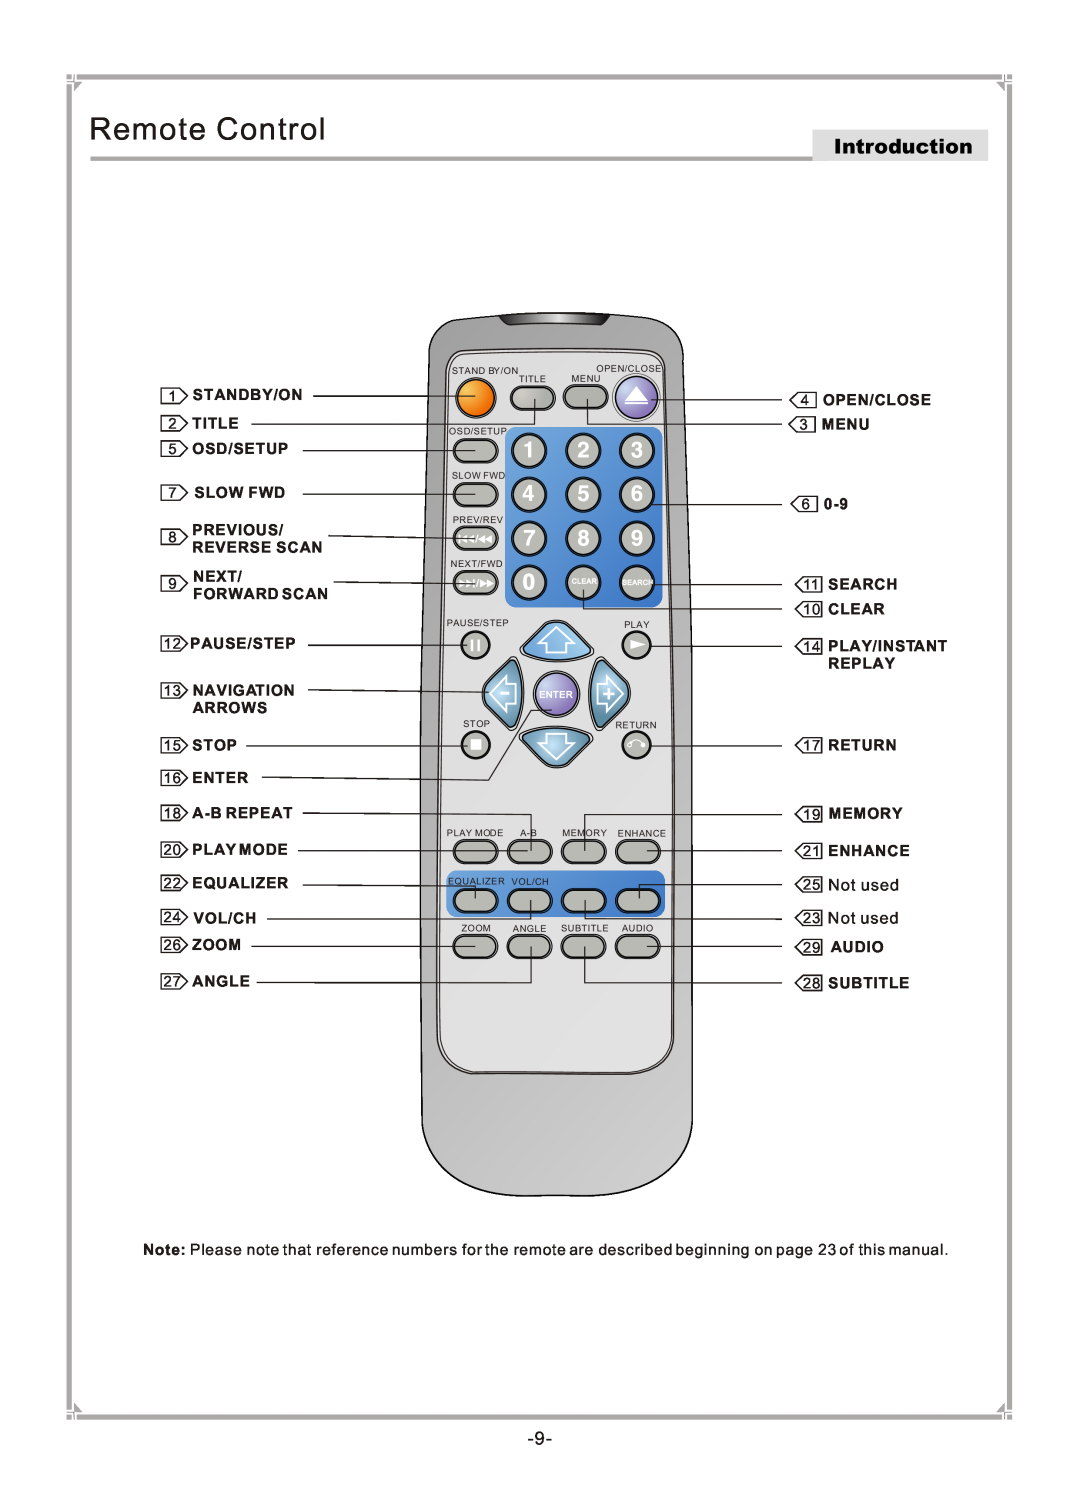 GoVideo DVP745 user manual Remote Control, Introduction, Not used 23 Not used 